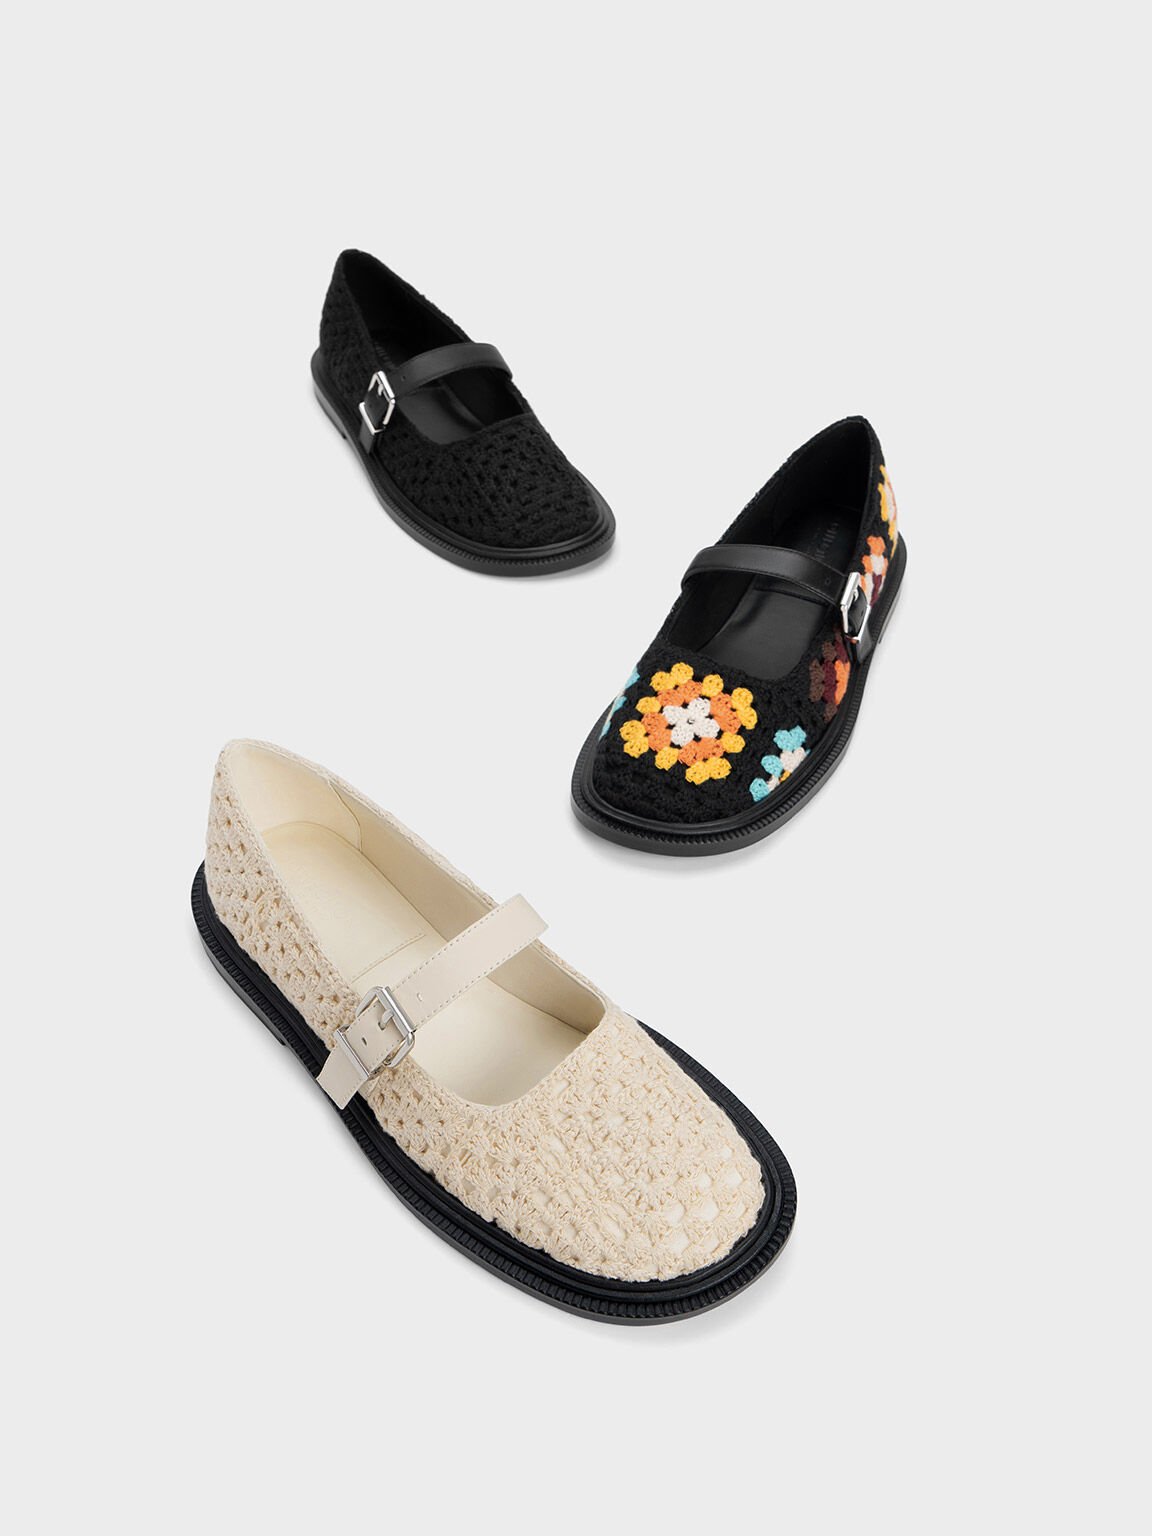 Crochet & Leather Mary Janes, Multi, hi-res